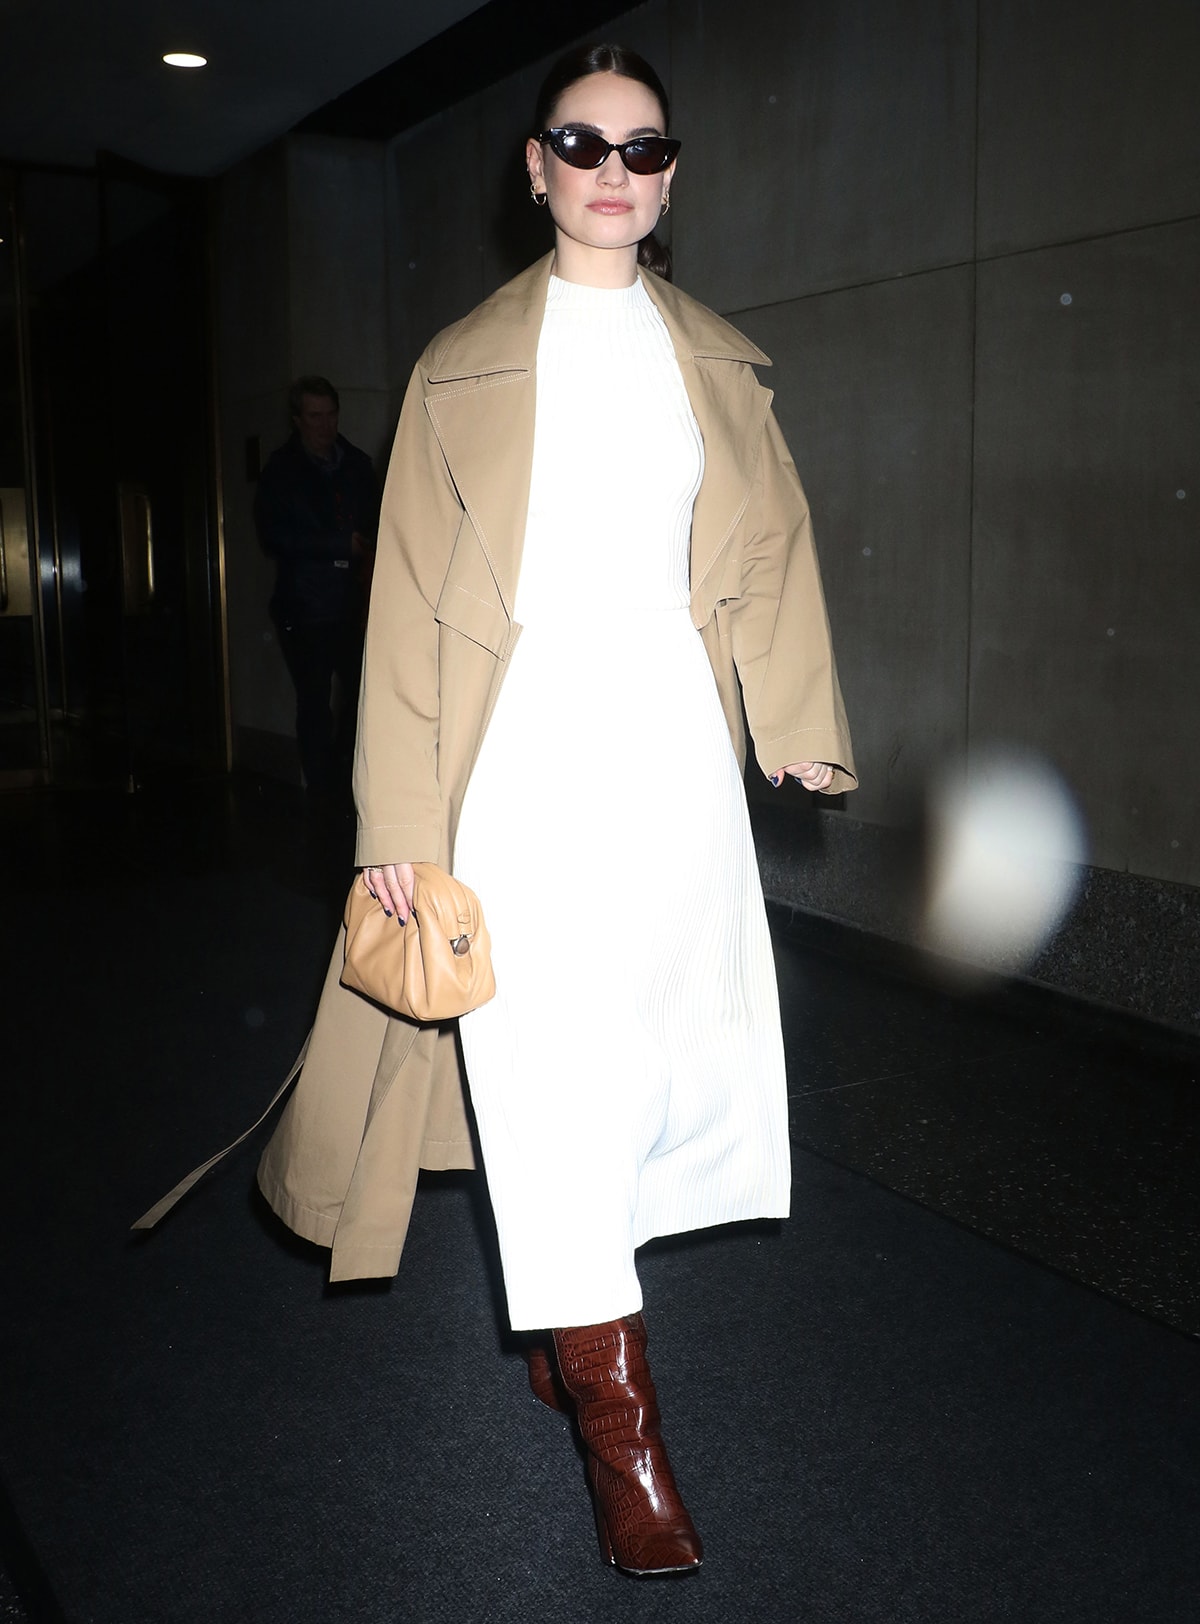 Lily James is warmly dressed as she pairs her rib-knit outfit with a khaki trench coat and a pair of Paris Texas croc-embossed knee-high boots